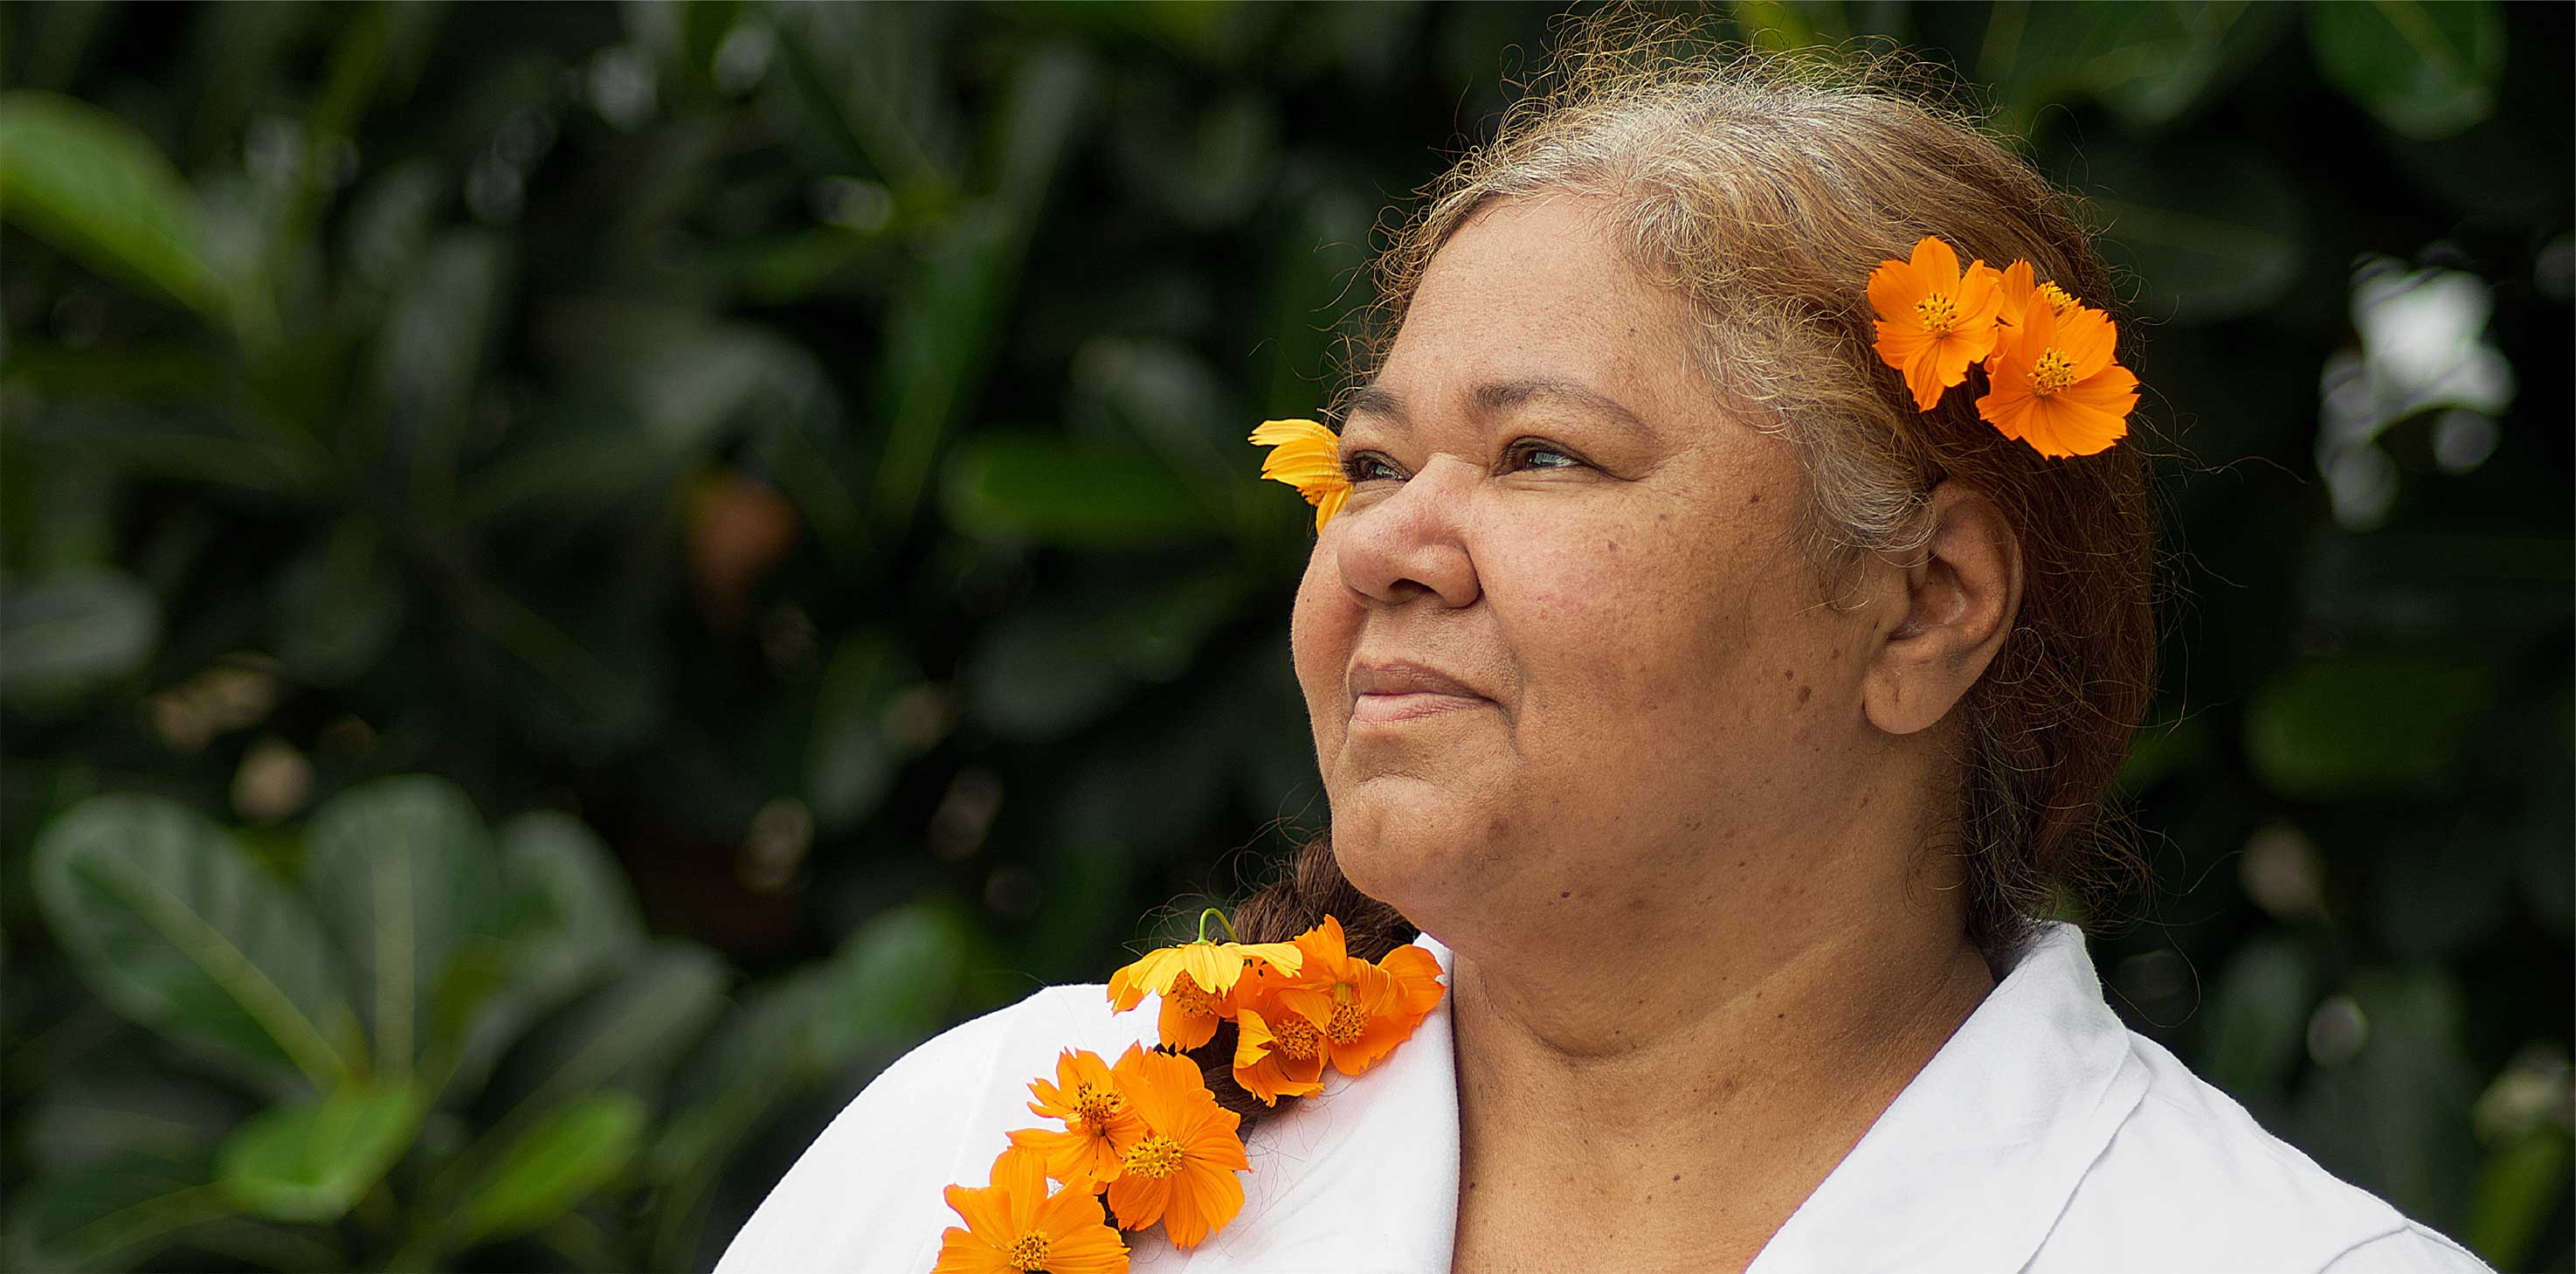 A headshot of a middle-aged Pasifika woman with orange flowers decorating her hair. She is smiling softly and gazing off into the distance.